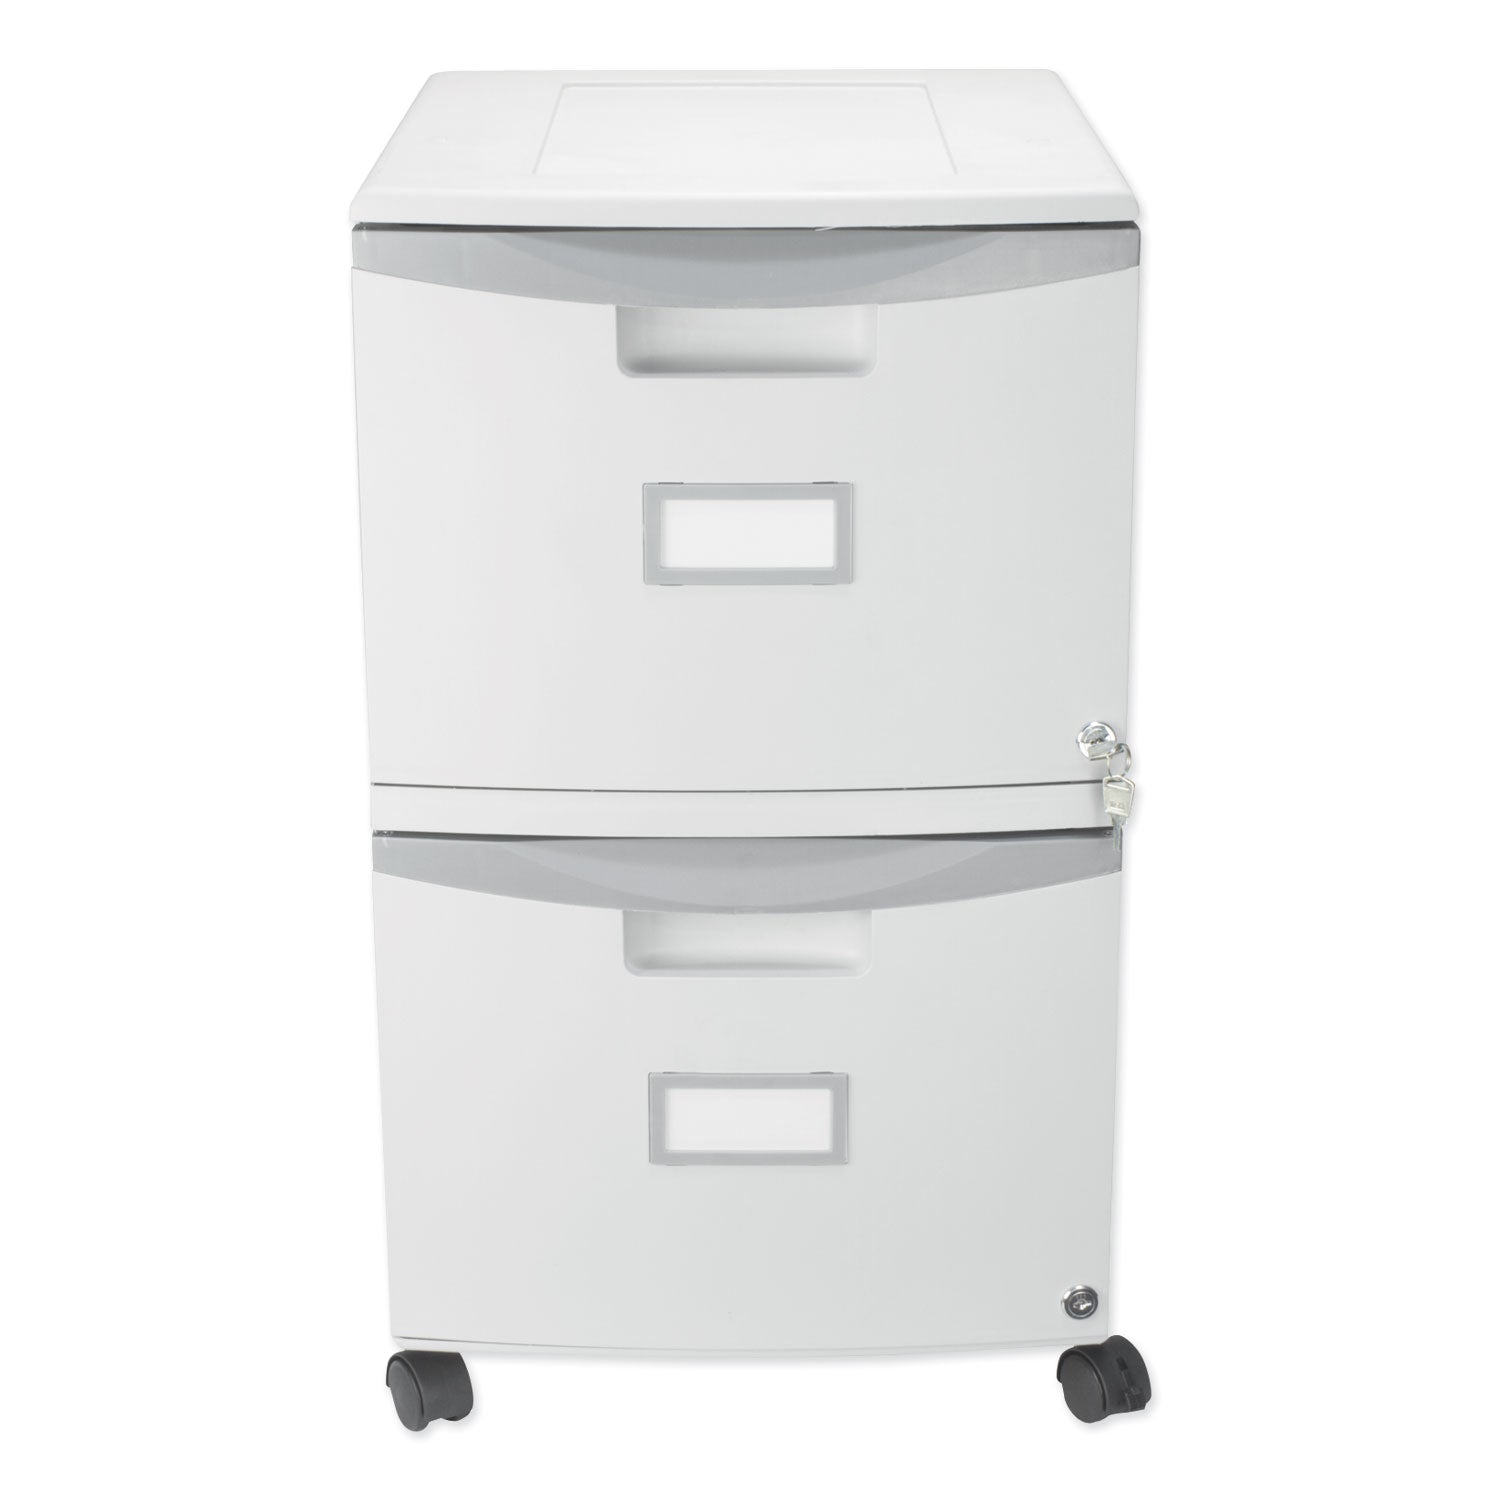 two-drawer-mobile-filing-cabinet-2-legal-letter-size-file-drawers-gray-1475-x-1825-x-26_stx61310b01c - 1